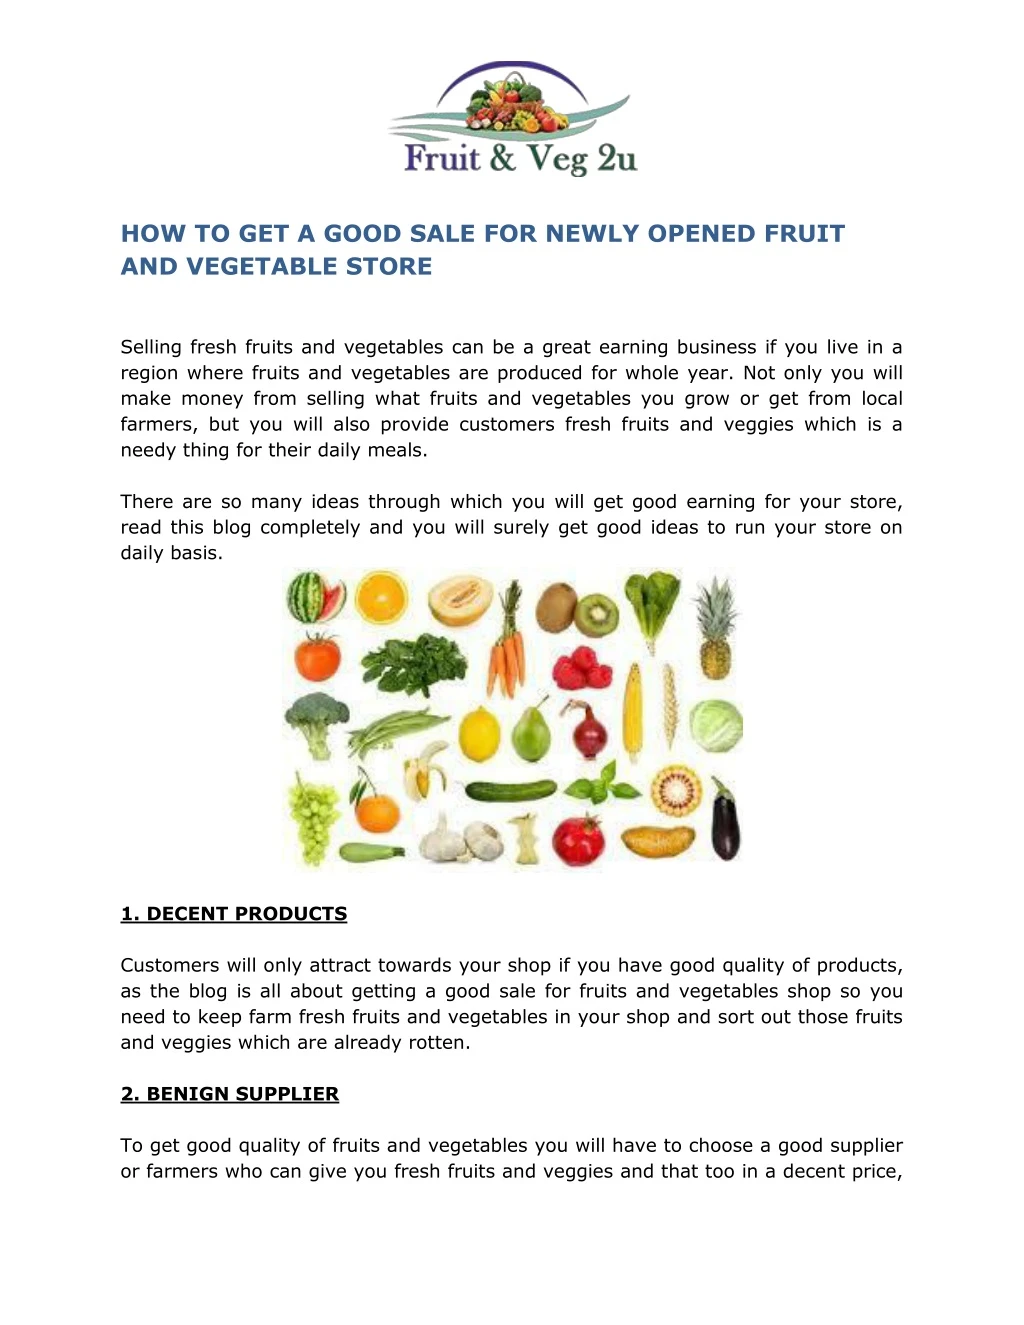 how to get a good sale for newly opened fruit